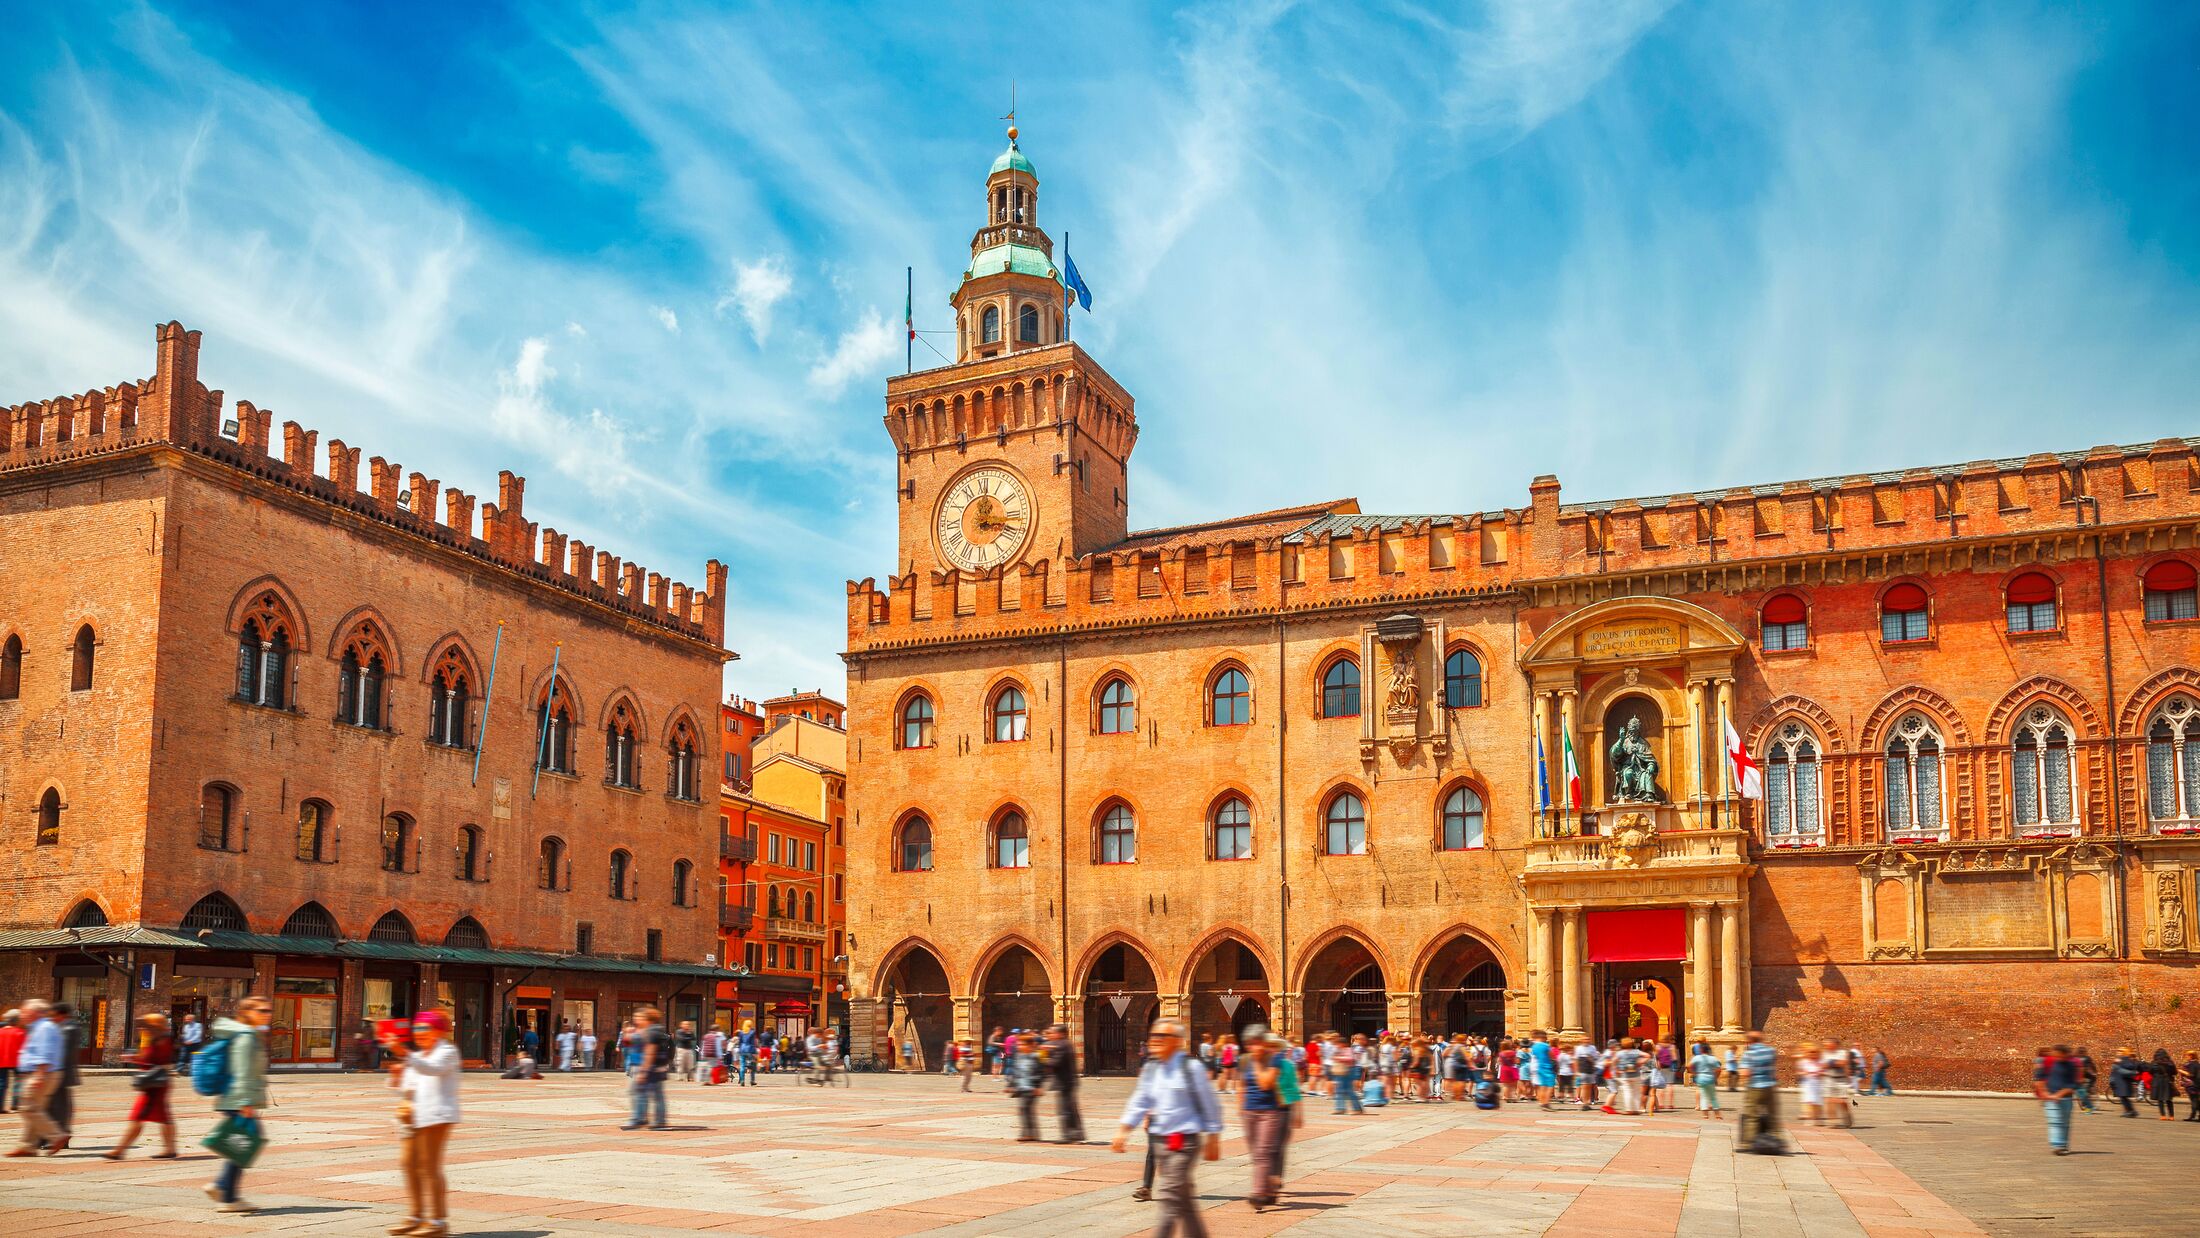 Italy Piazza Maggiore in Bologna old town tower of hall with big clock and blue sky on background. Antique buildings terracotta galleries